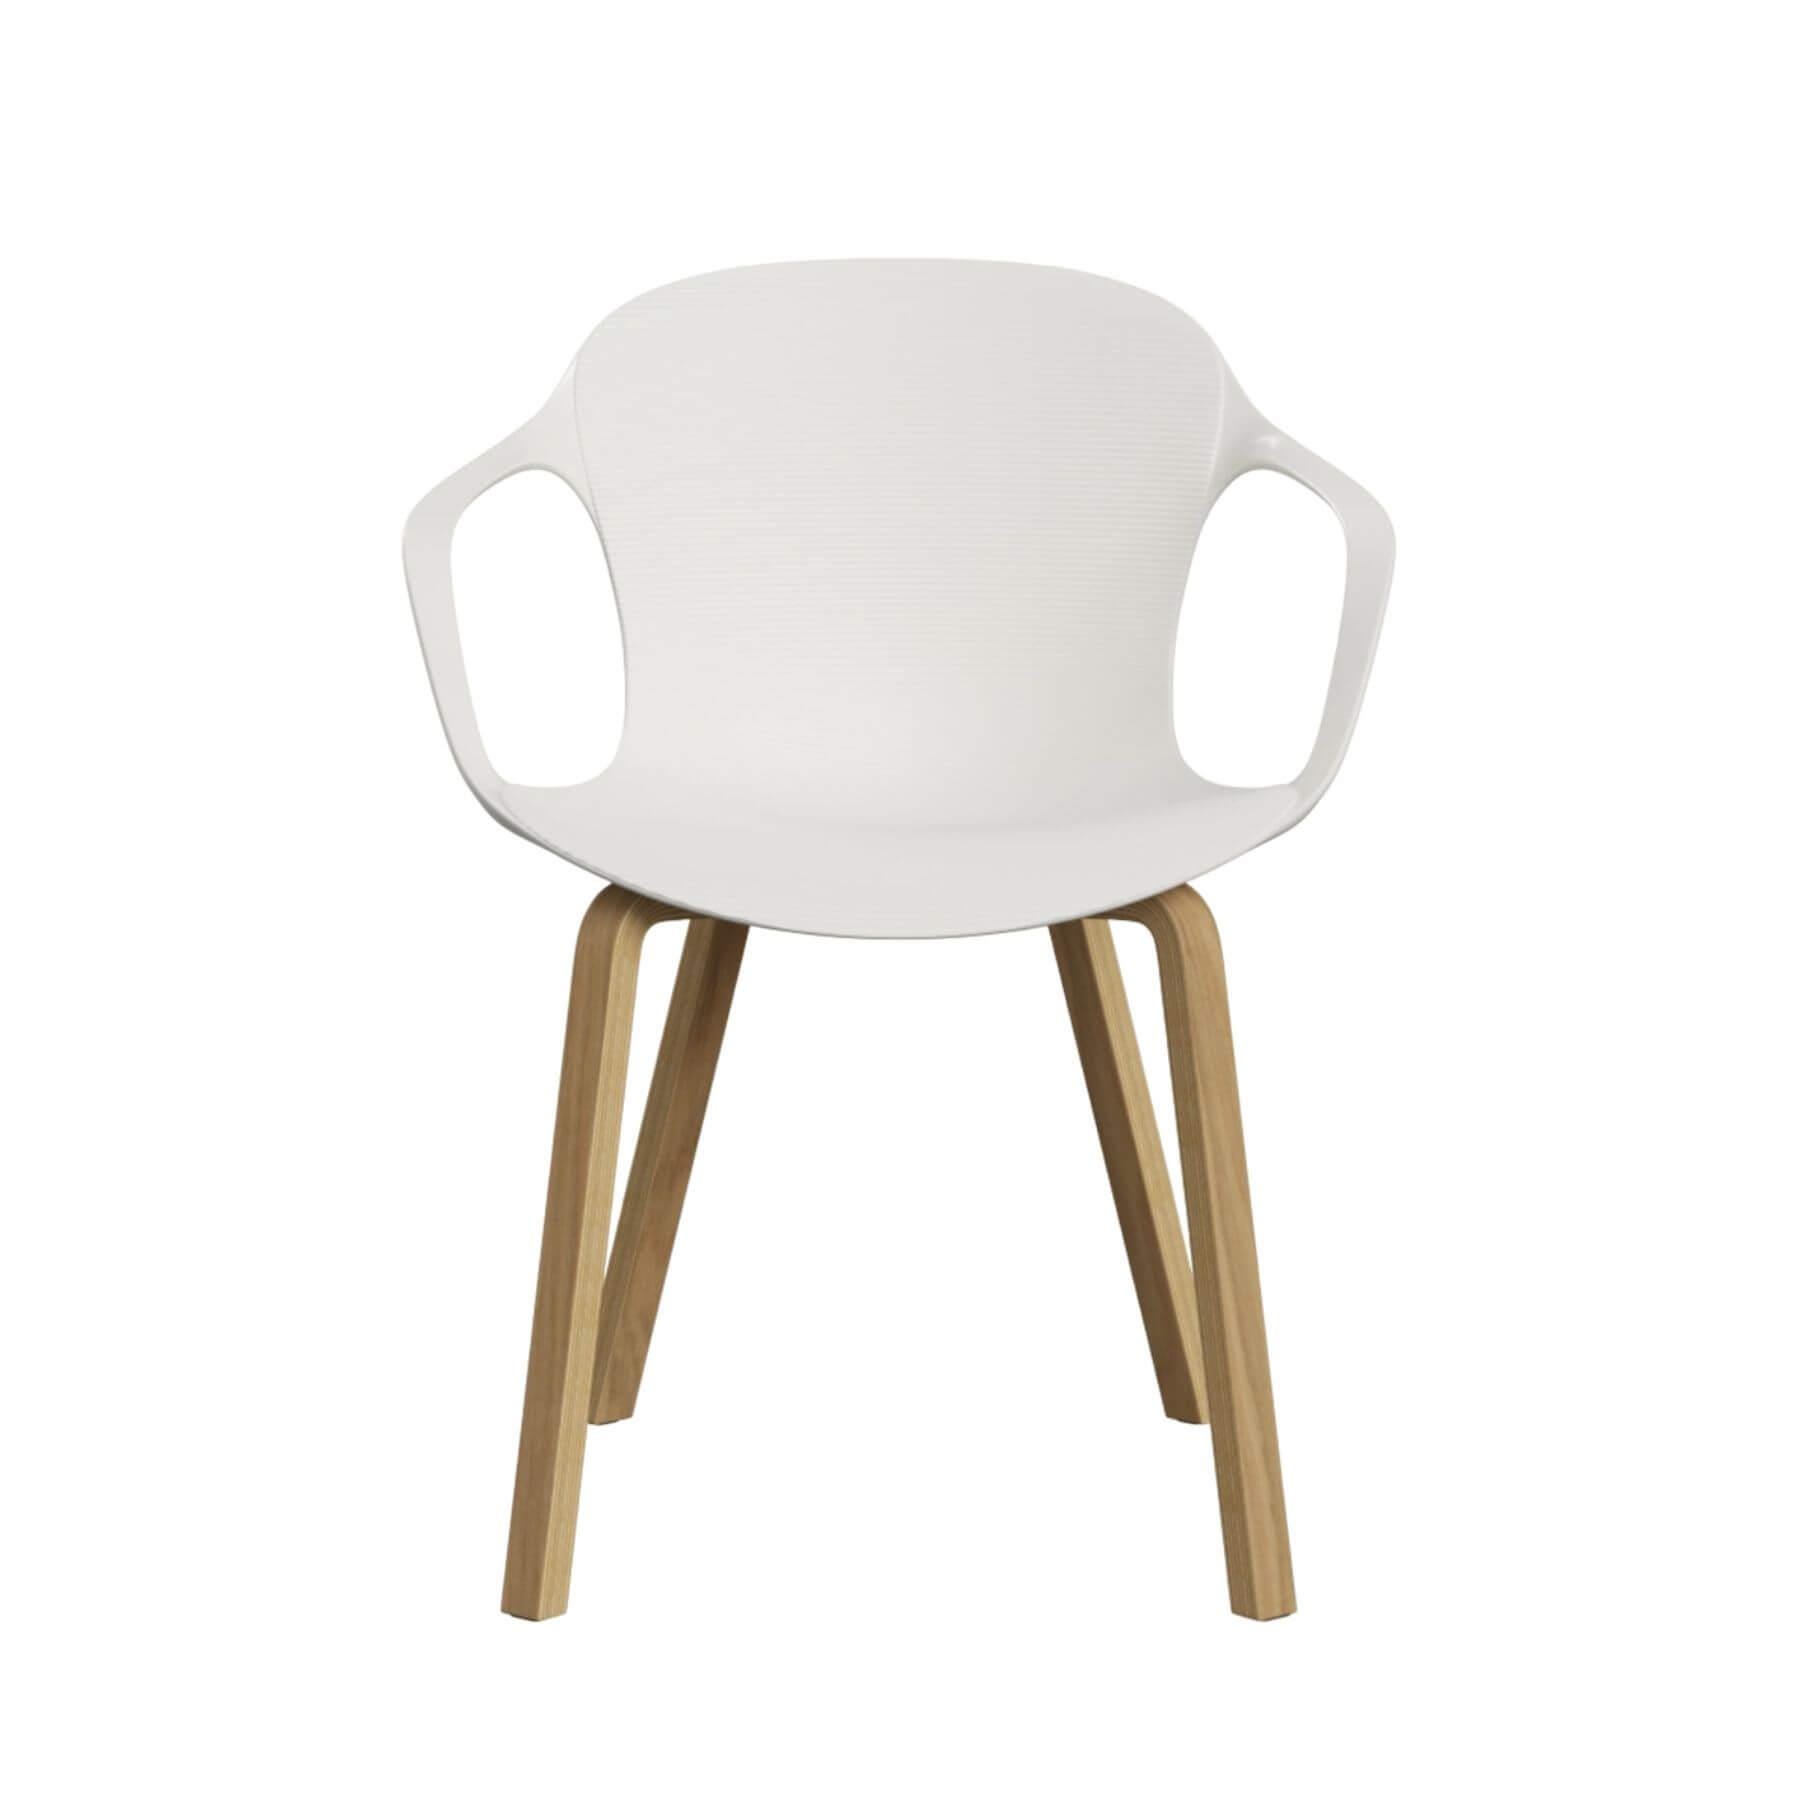 Fritz Hansen Nap Dining Chair Milk White With Arms Wood Base White Designer Furniture From Holloways Of Ludlow